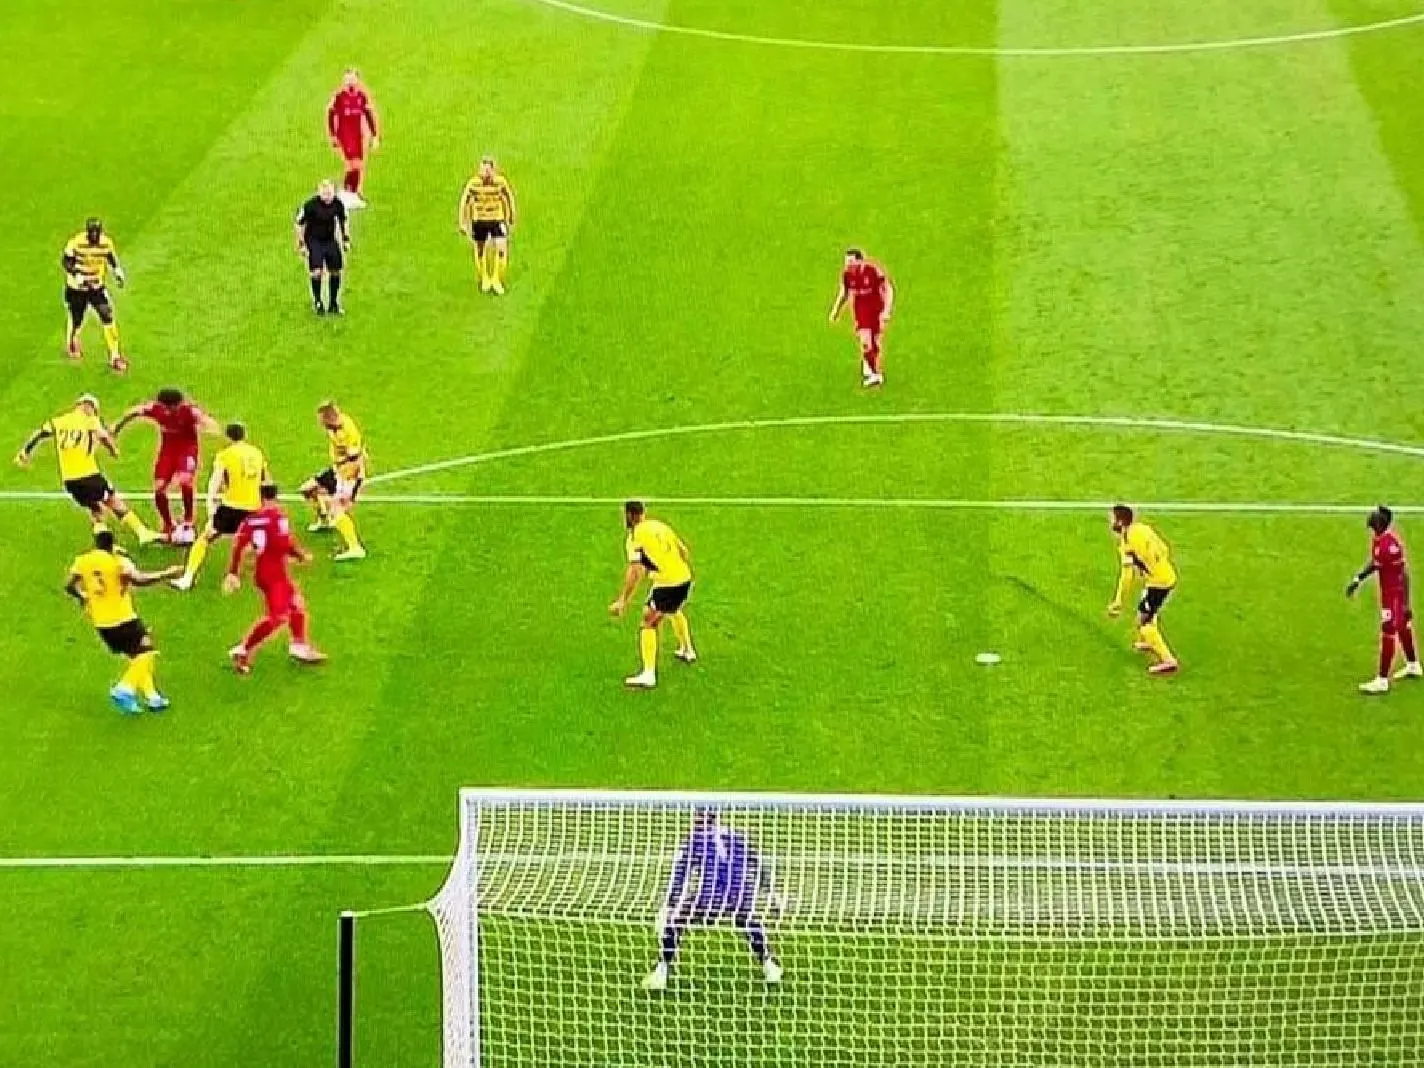 Mohamed Salah surrounded by Watford players before his goal